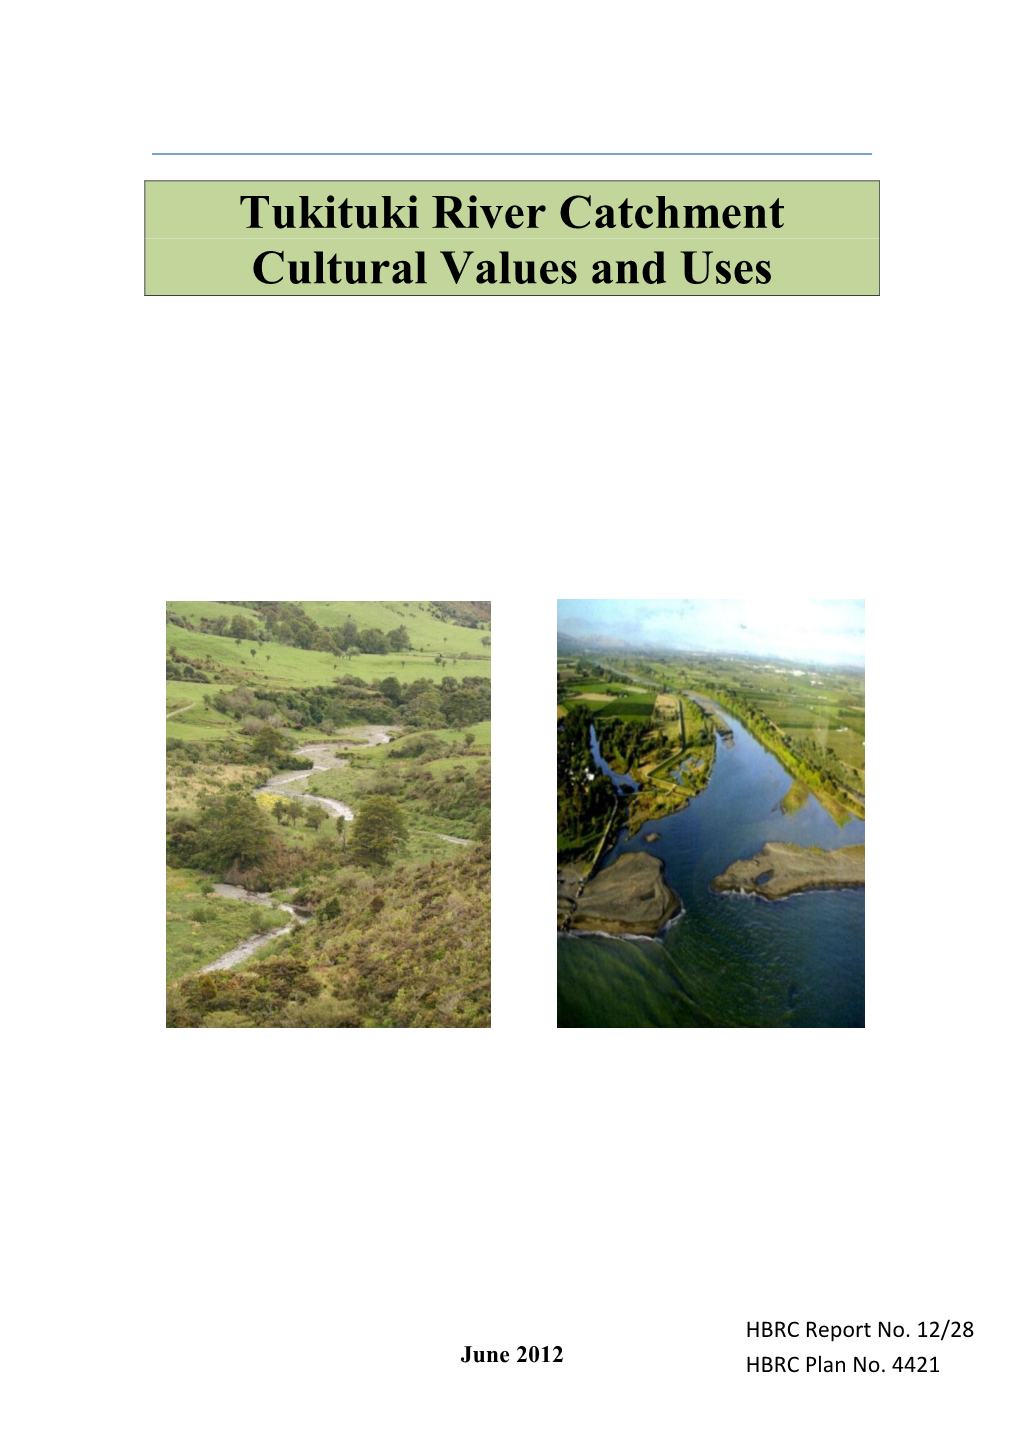 Tukituki River Catchment Cultural Values and Uses